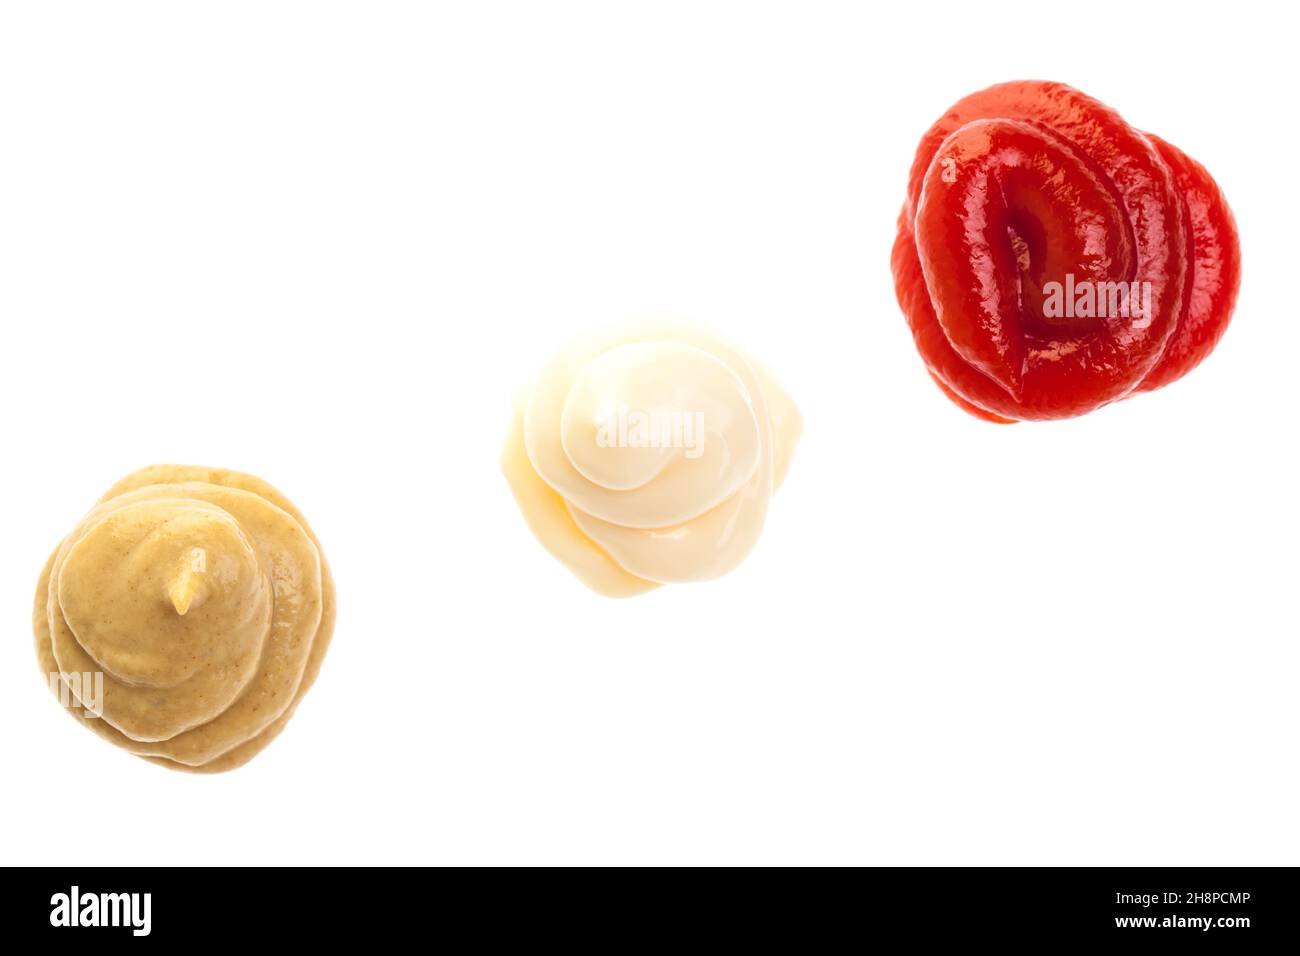 Ketchup, mayonnaise and mustard from bird's eye view ketchup, mustard, mayonnaise, sauces, yellow, red, white, together, creamy sauce Stock Photo